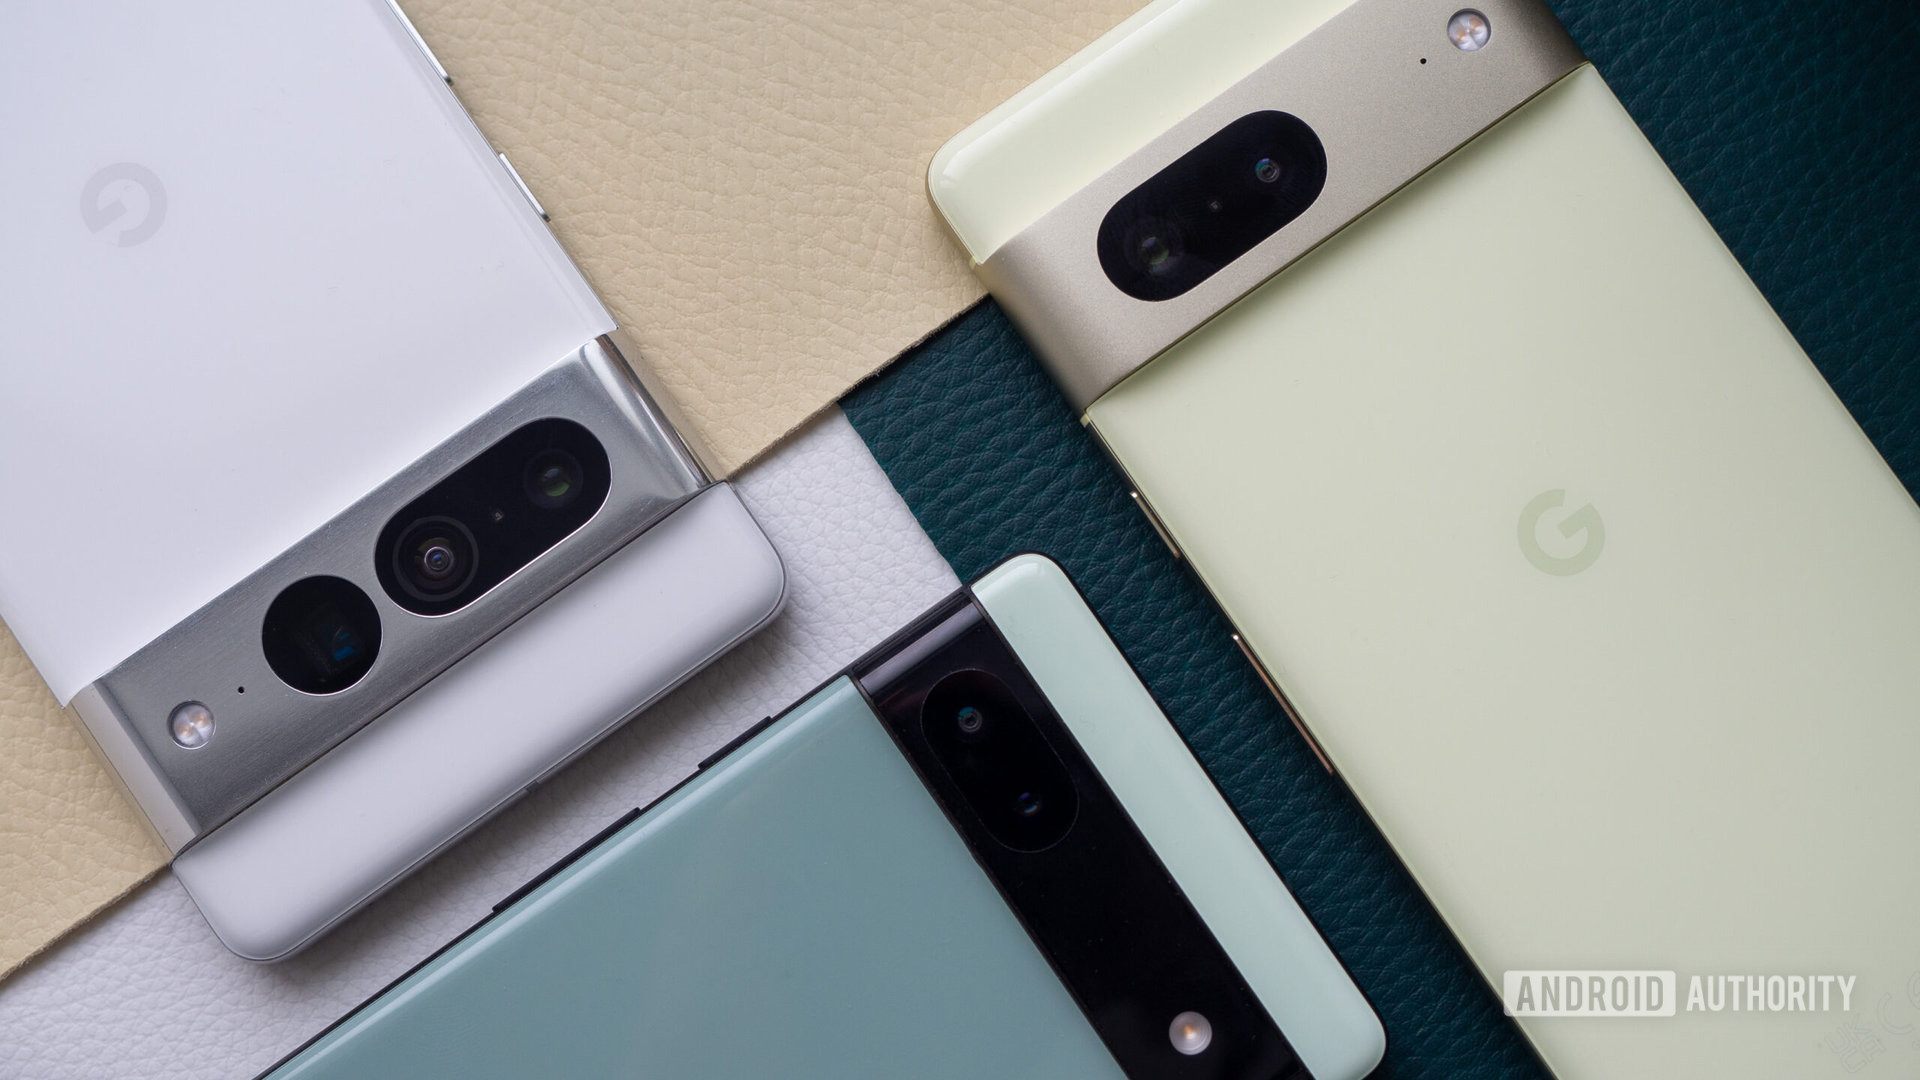 HTC is reviving a high end phone series later this week